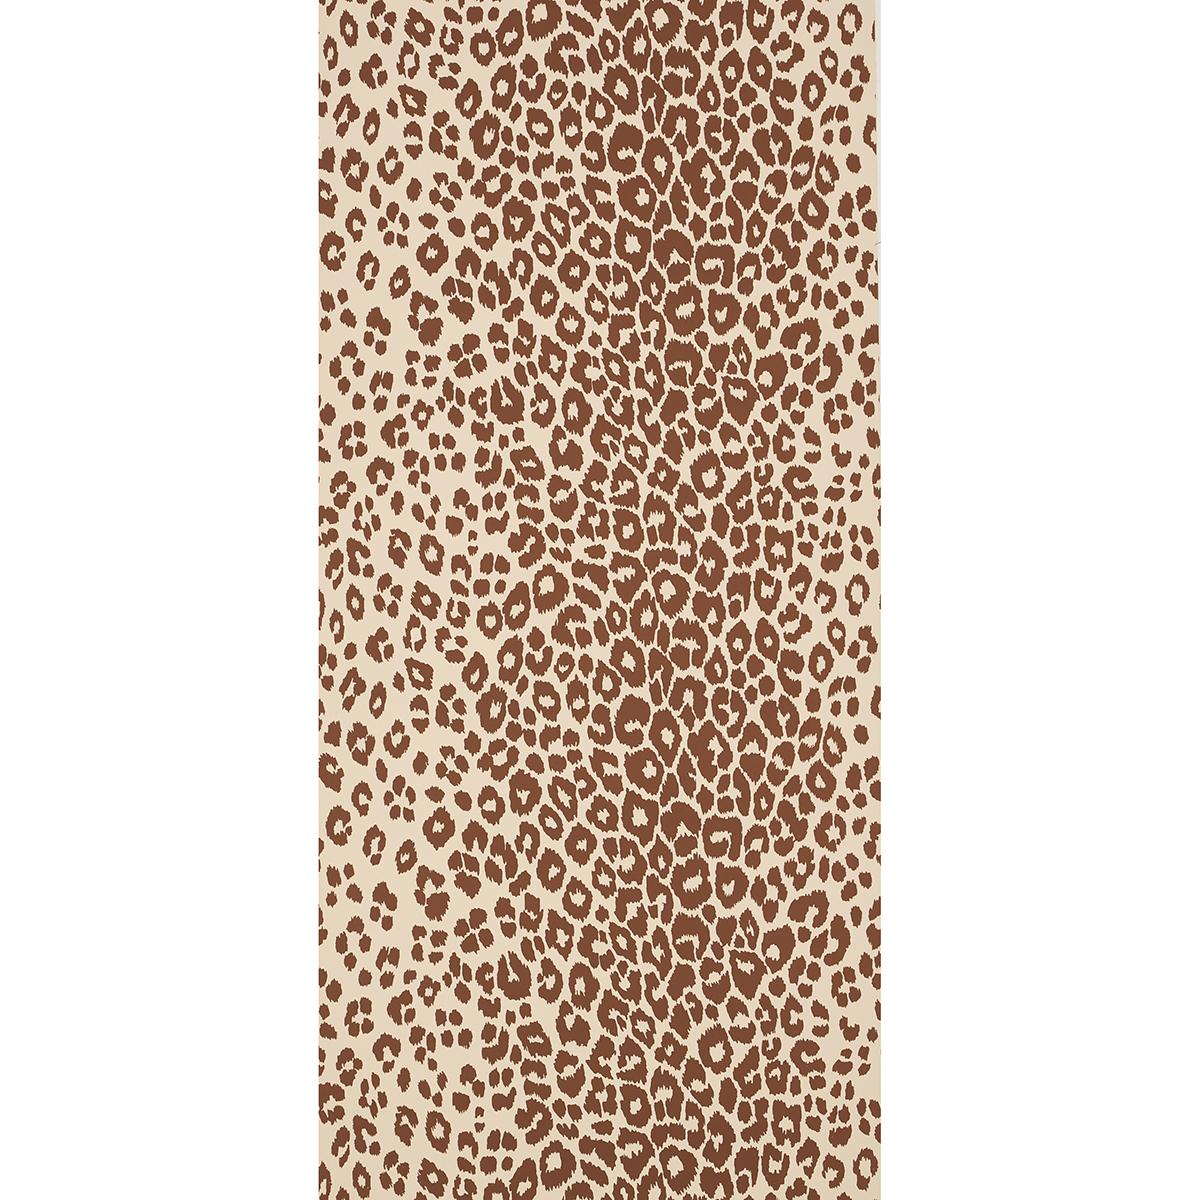 ICONIC LEOPARD_BROWN ON NEUTRAL